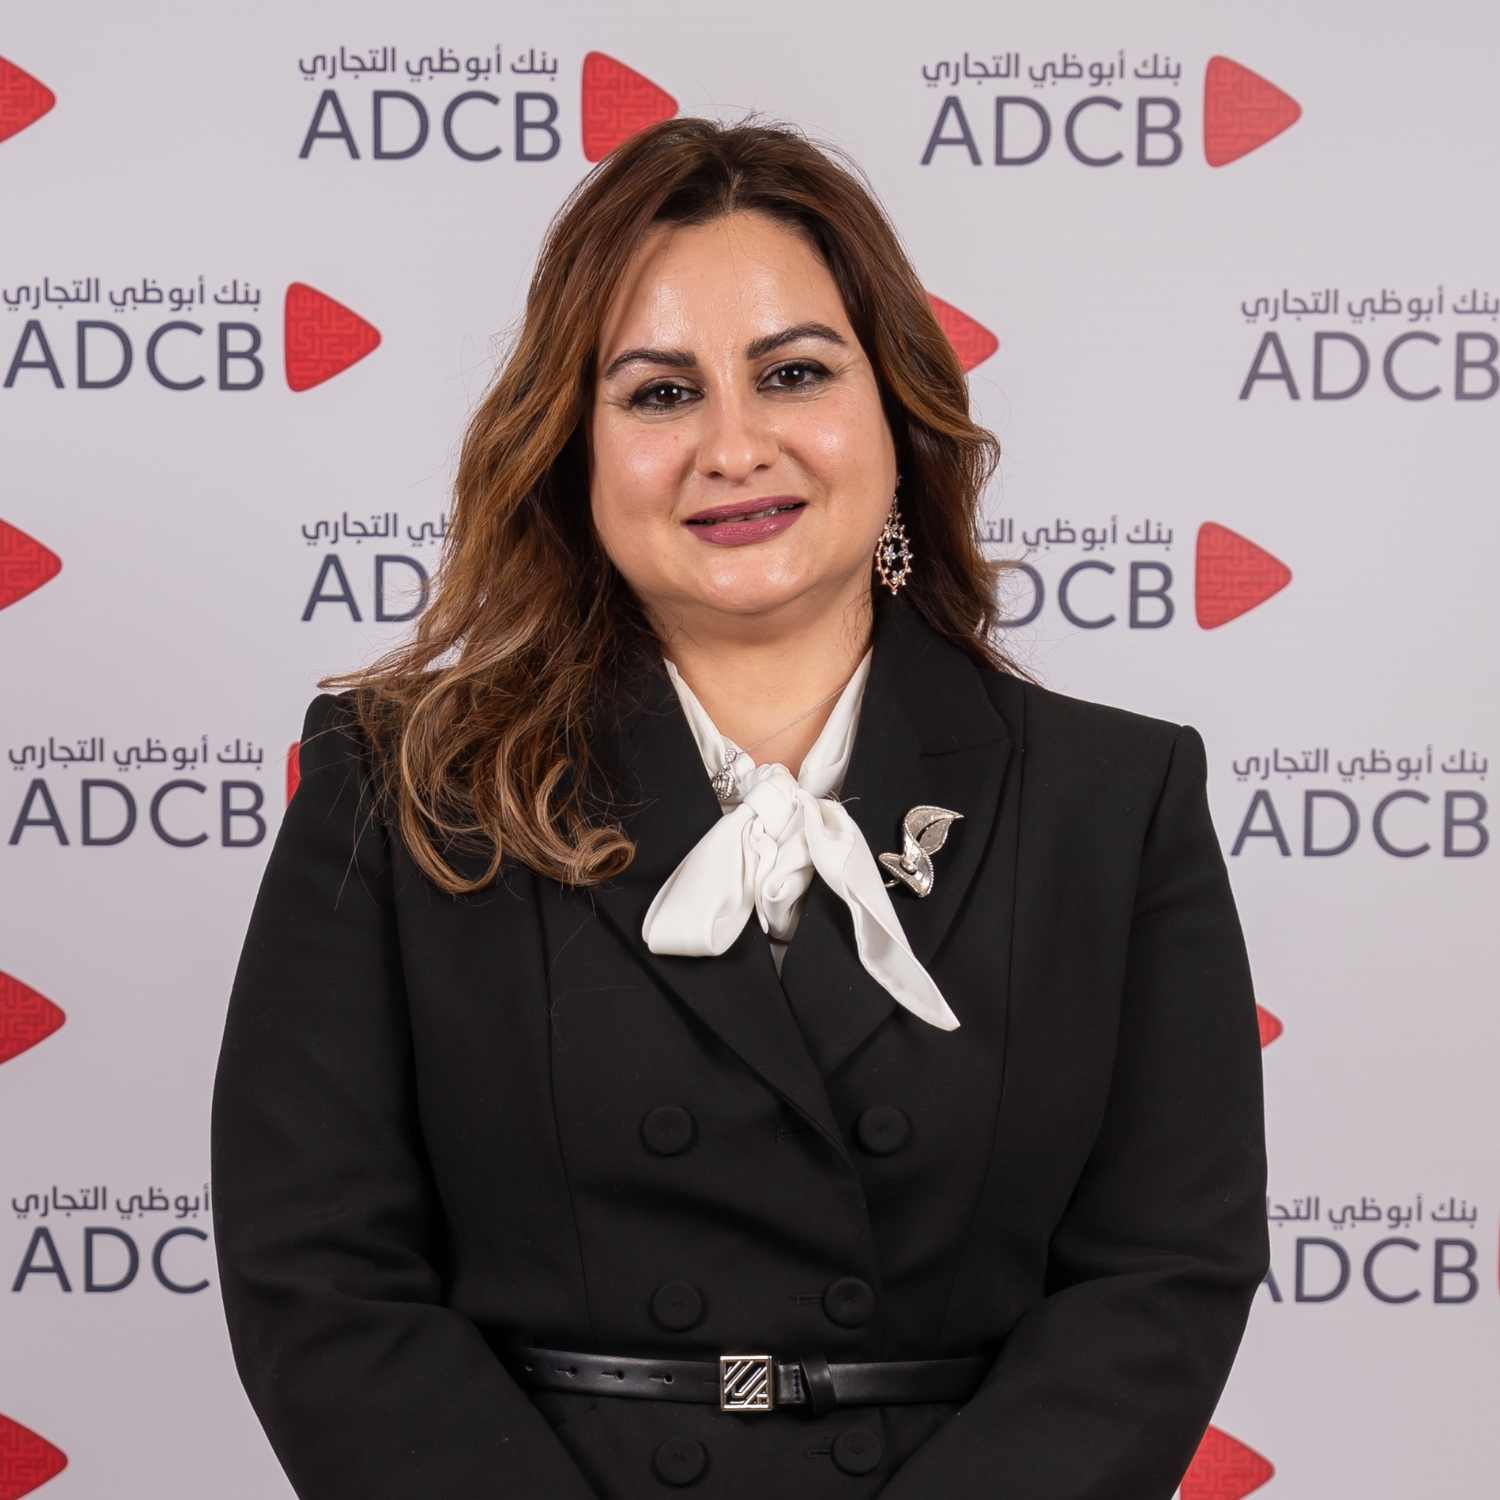 Dr. Merit Salama _ ADCB Egypt Member of the Board of Directors (Independent, Non-Executive)